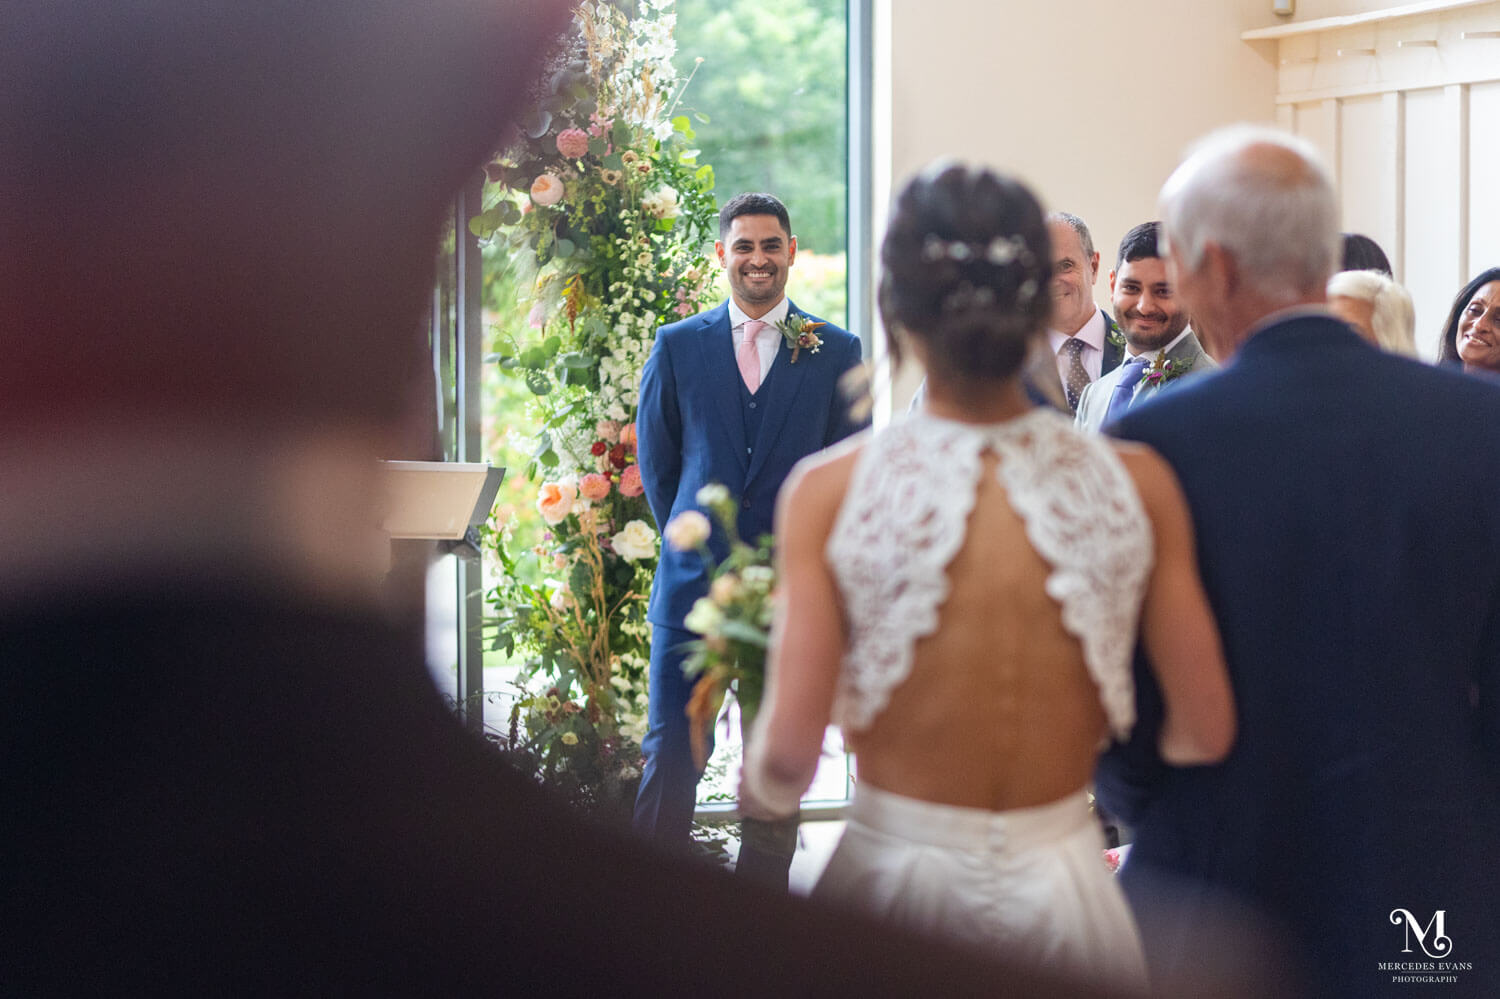 the groom watches his bride as she walks down the aisle in a modern wedding venue